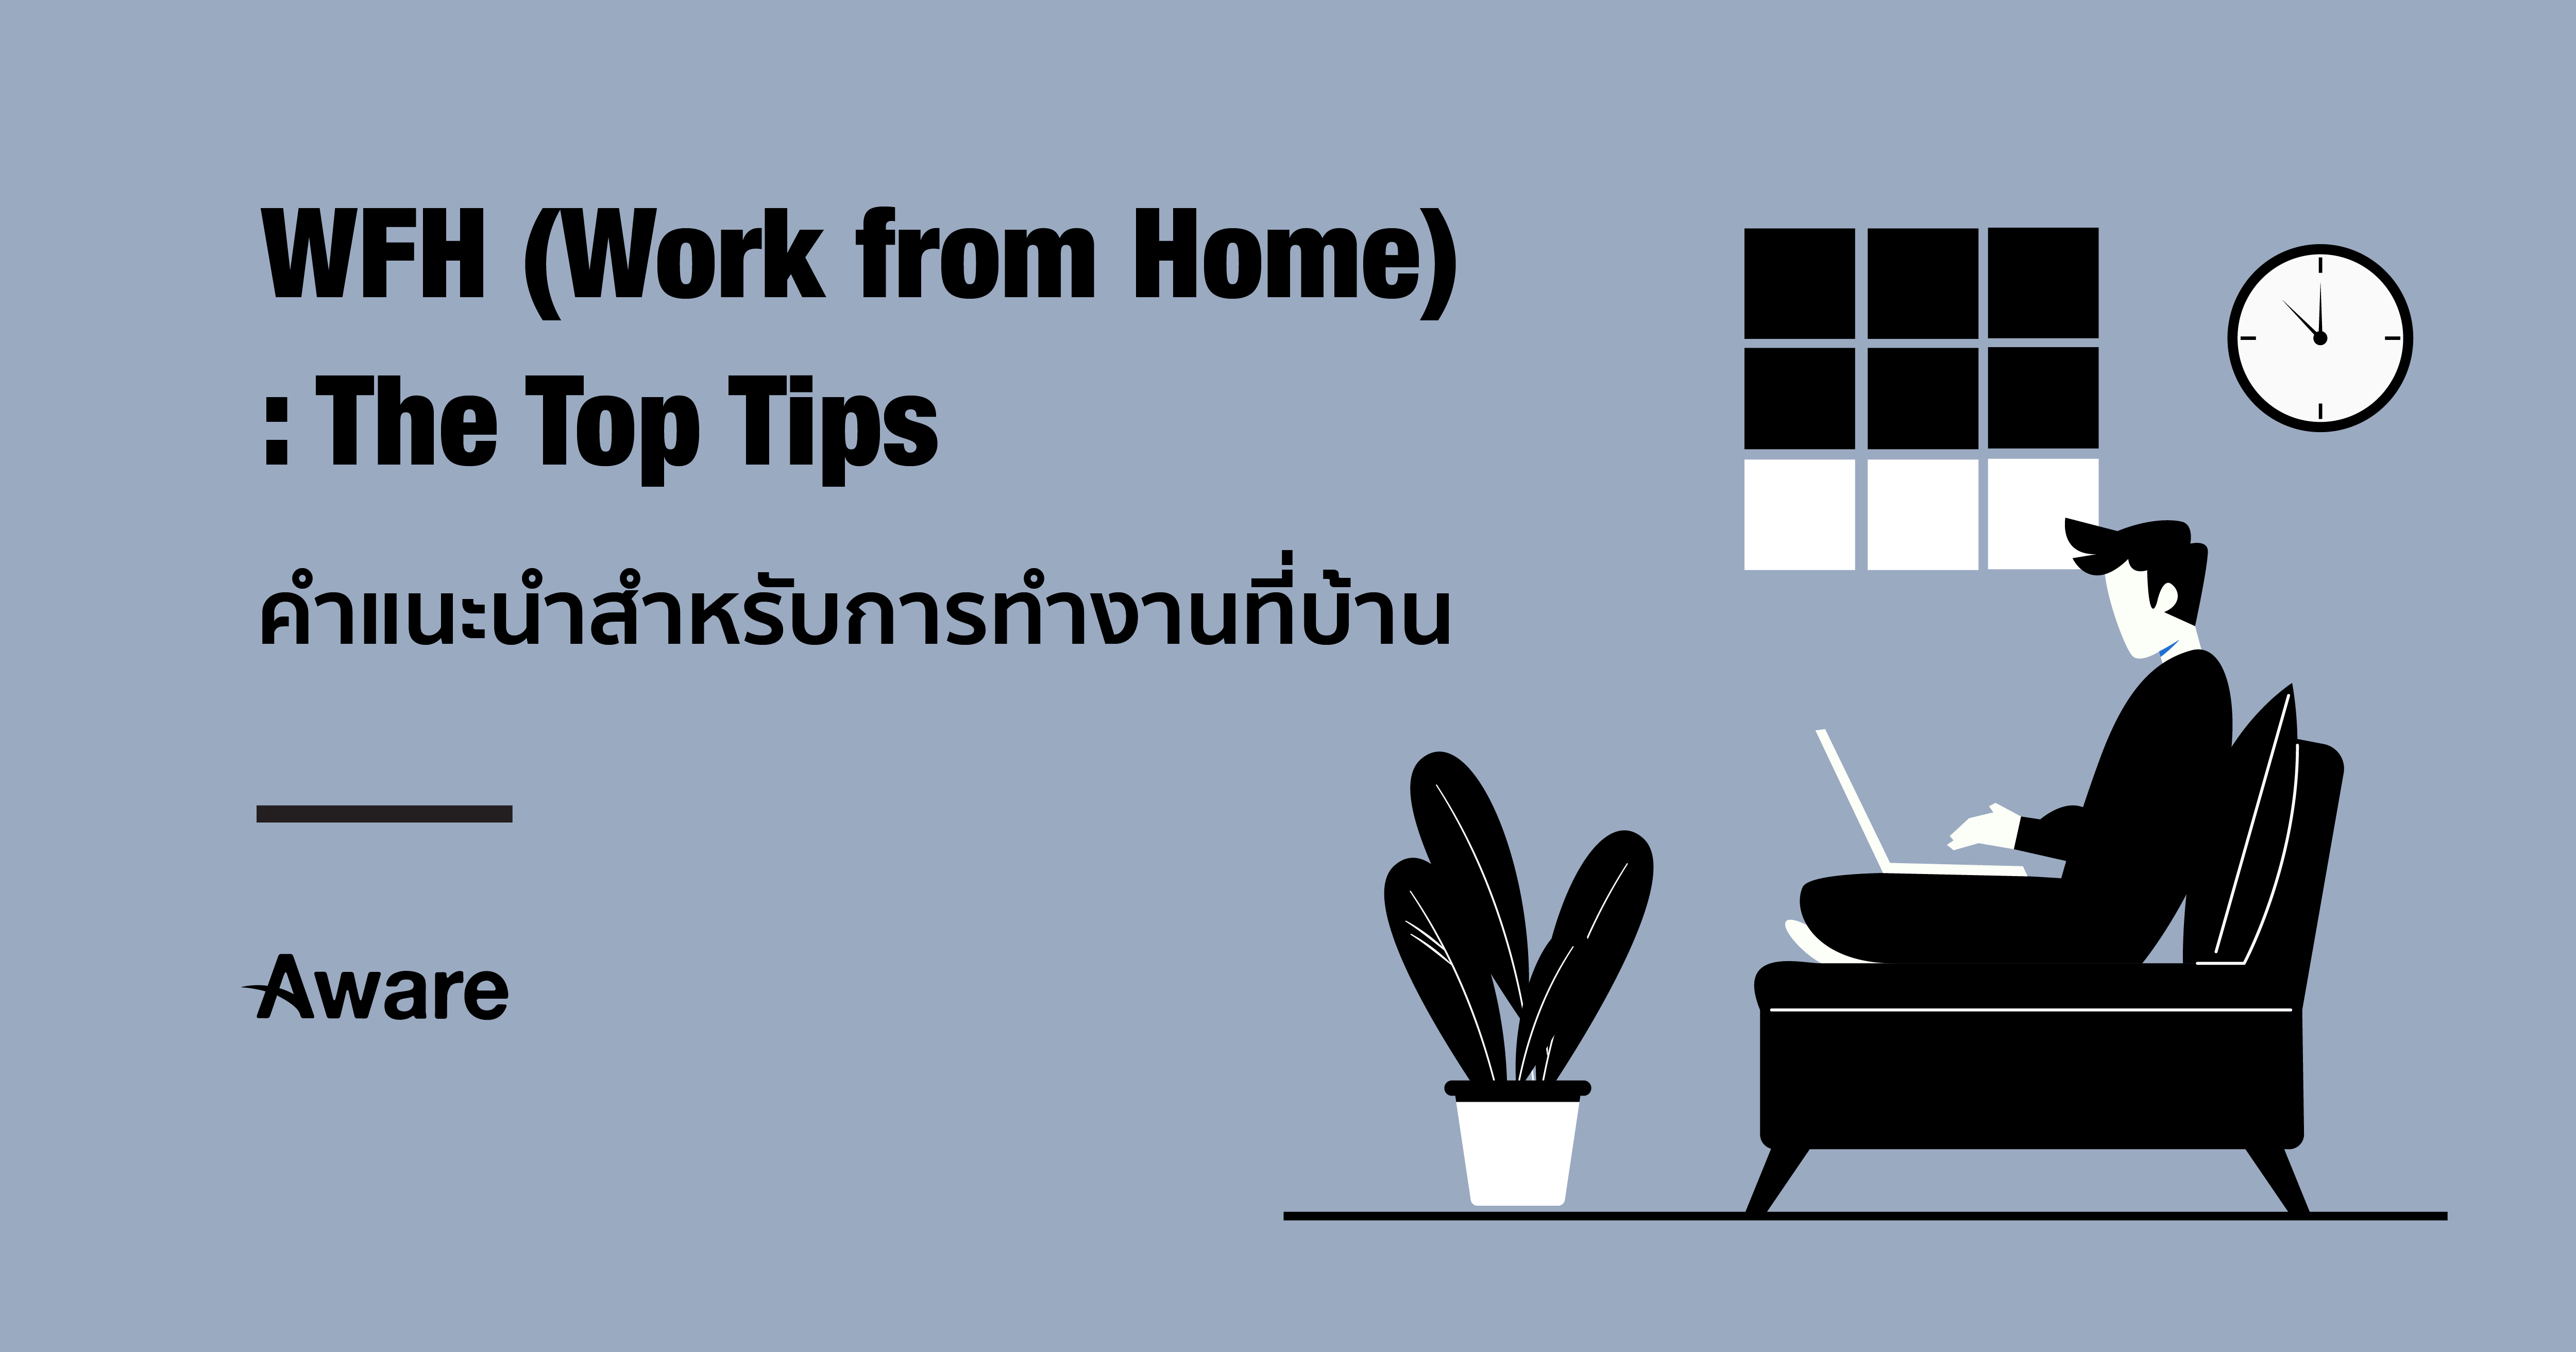 WFH (Work from Home): The Top Tips